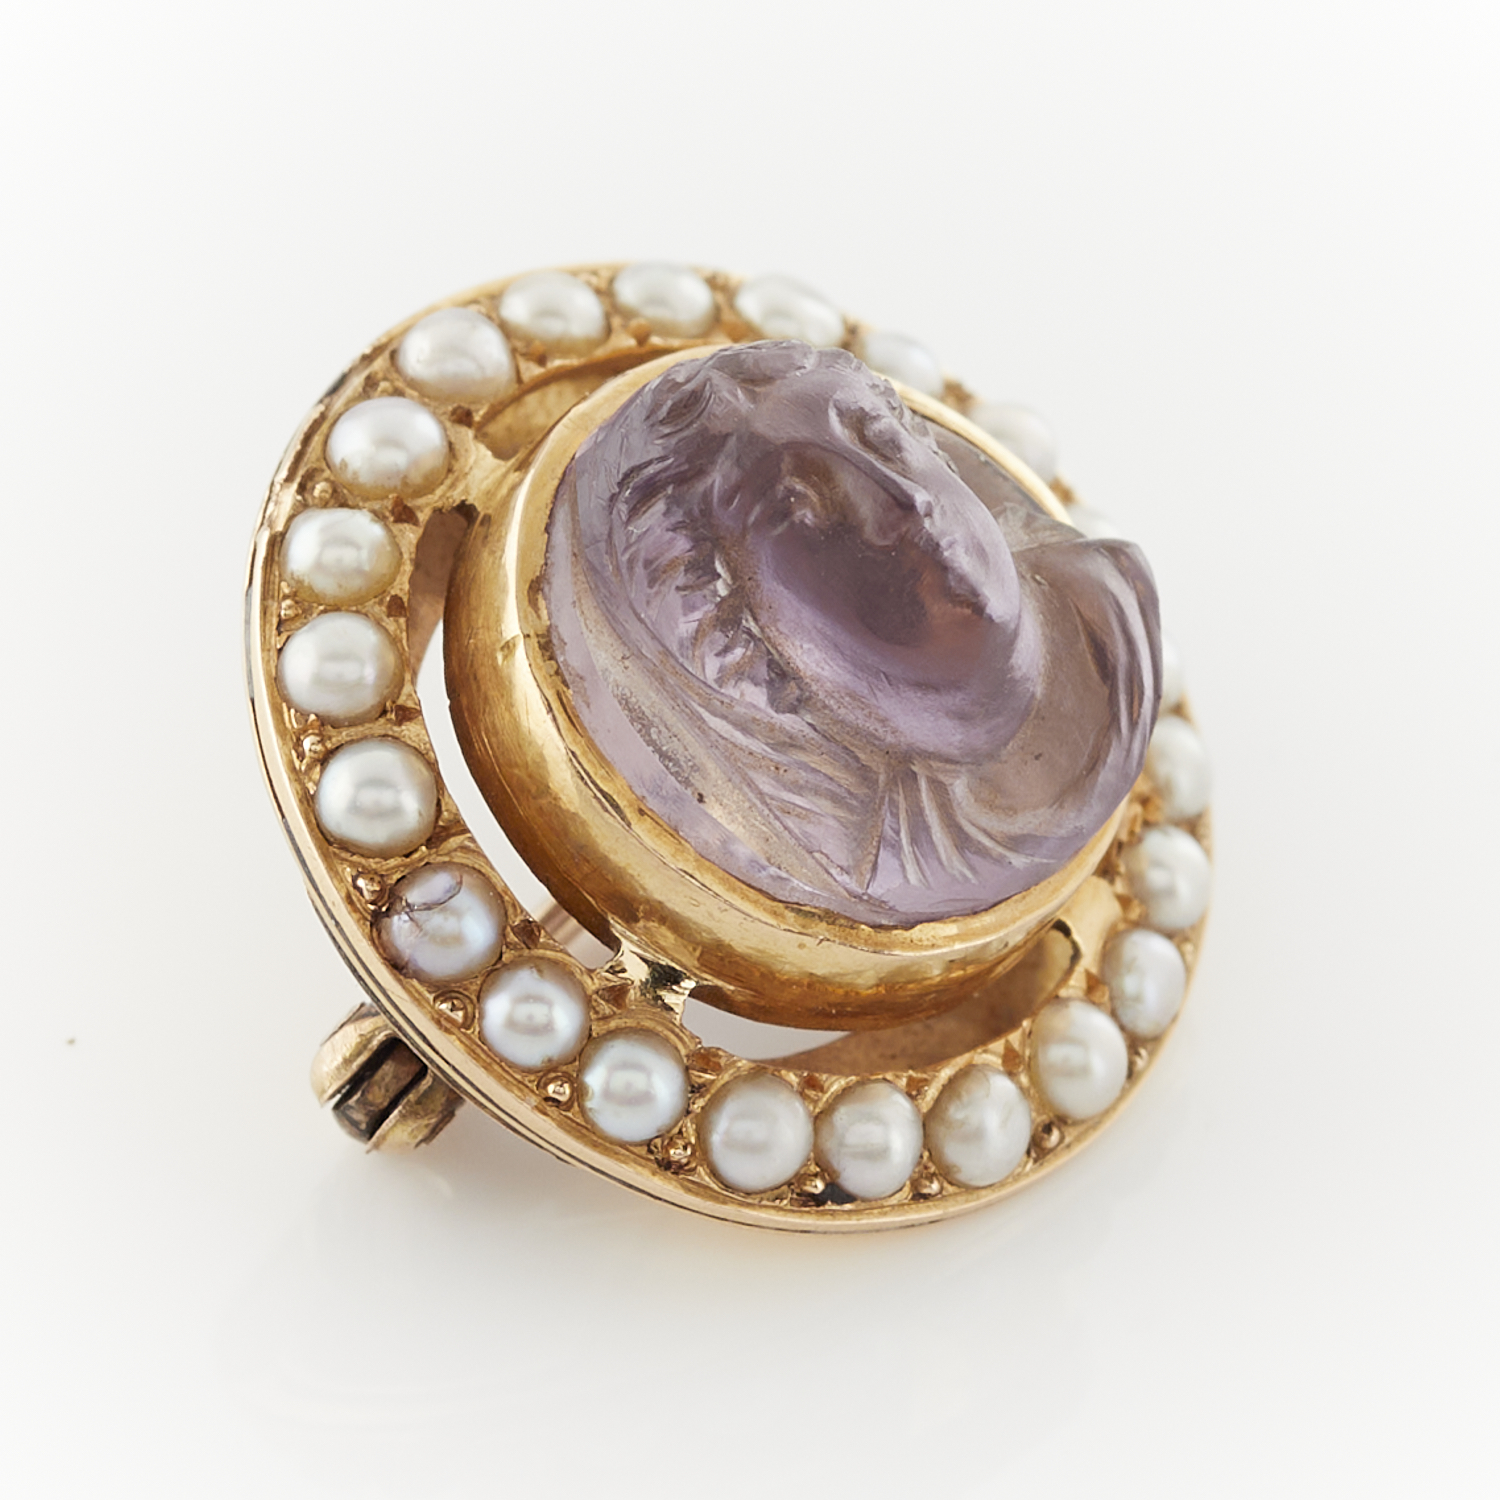 14k Yellow Gold Amethyst Cameo & Pearl Brooch - Image 4 of 7